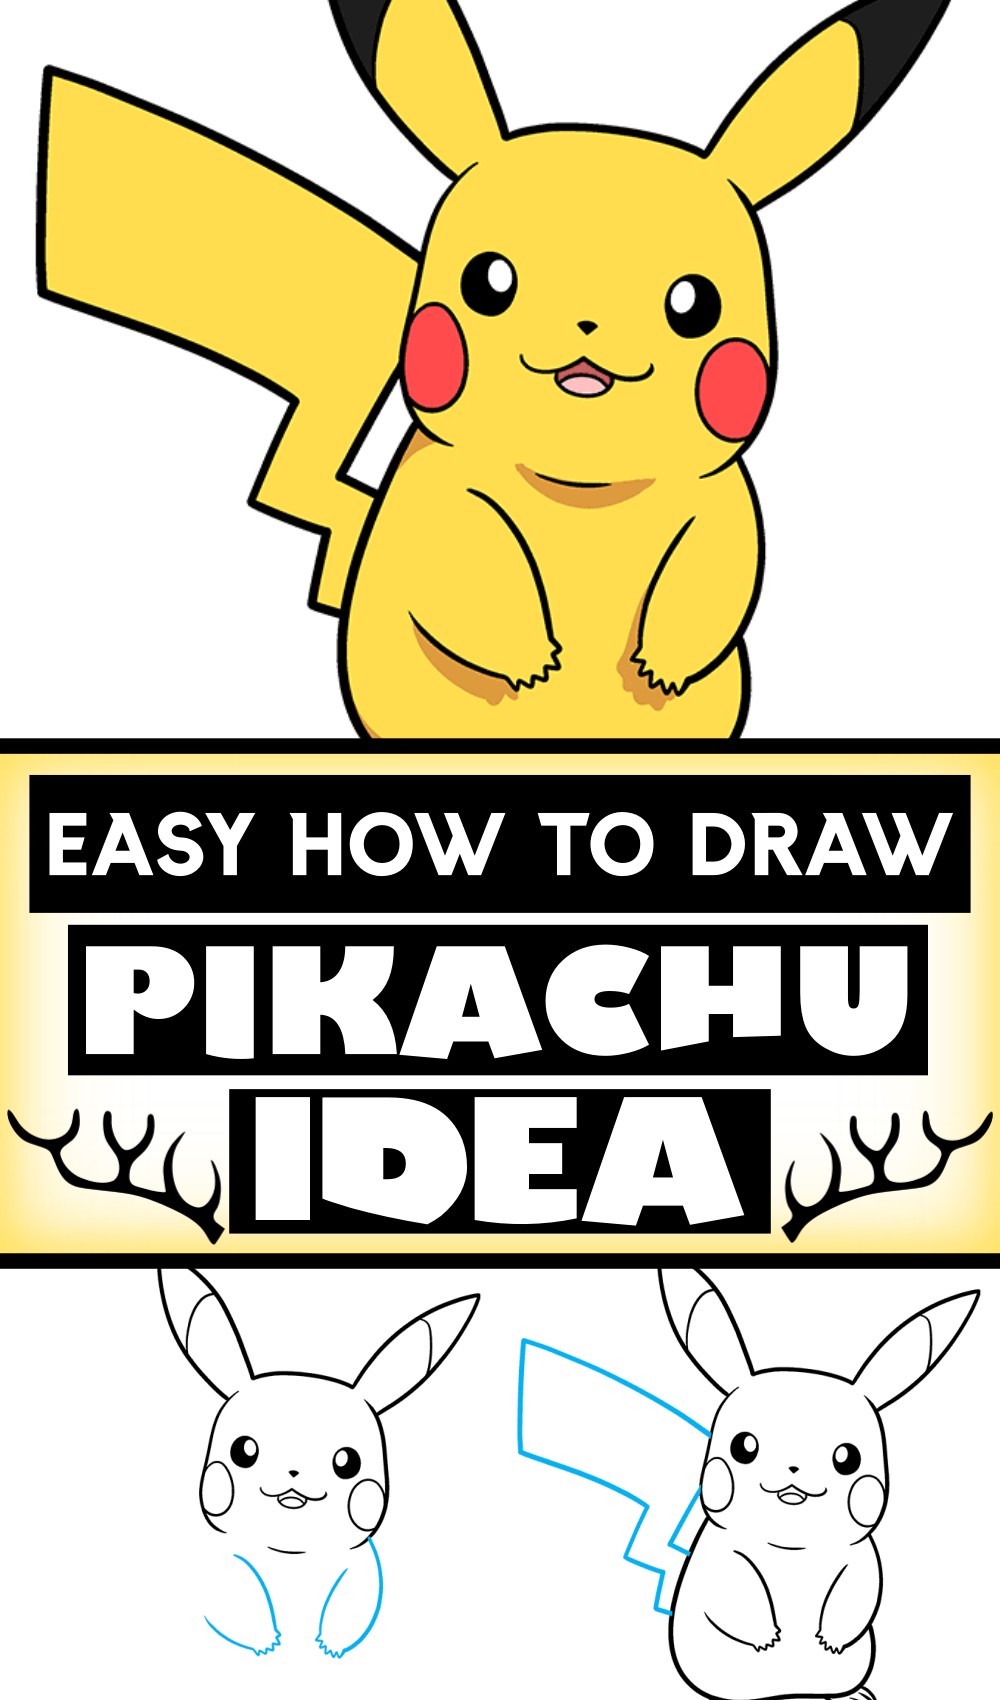 Easy How To Draw Pikachu